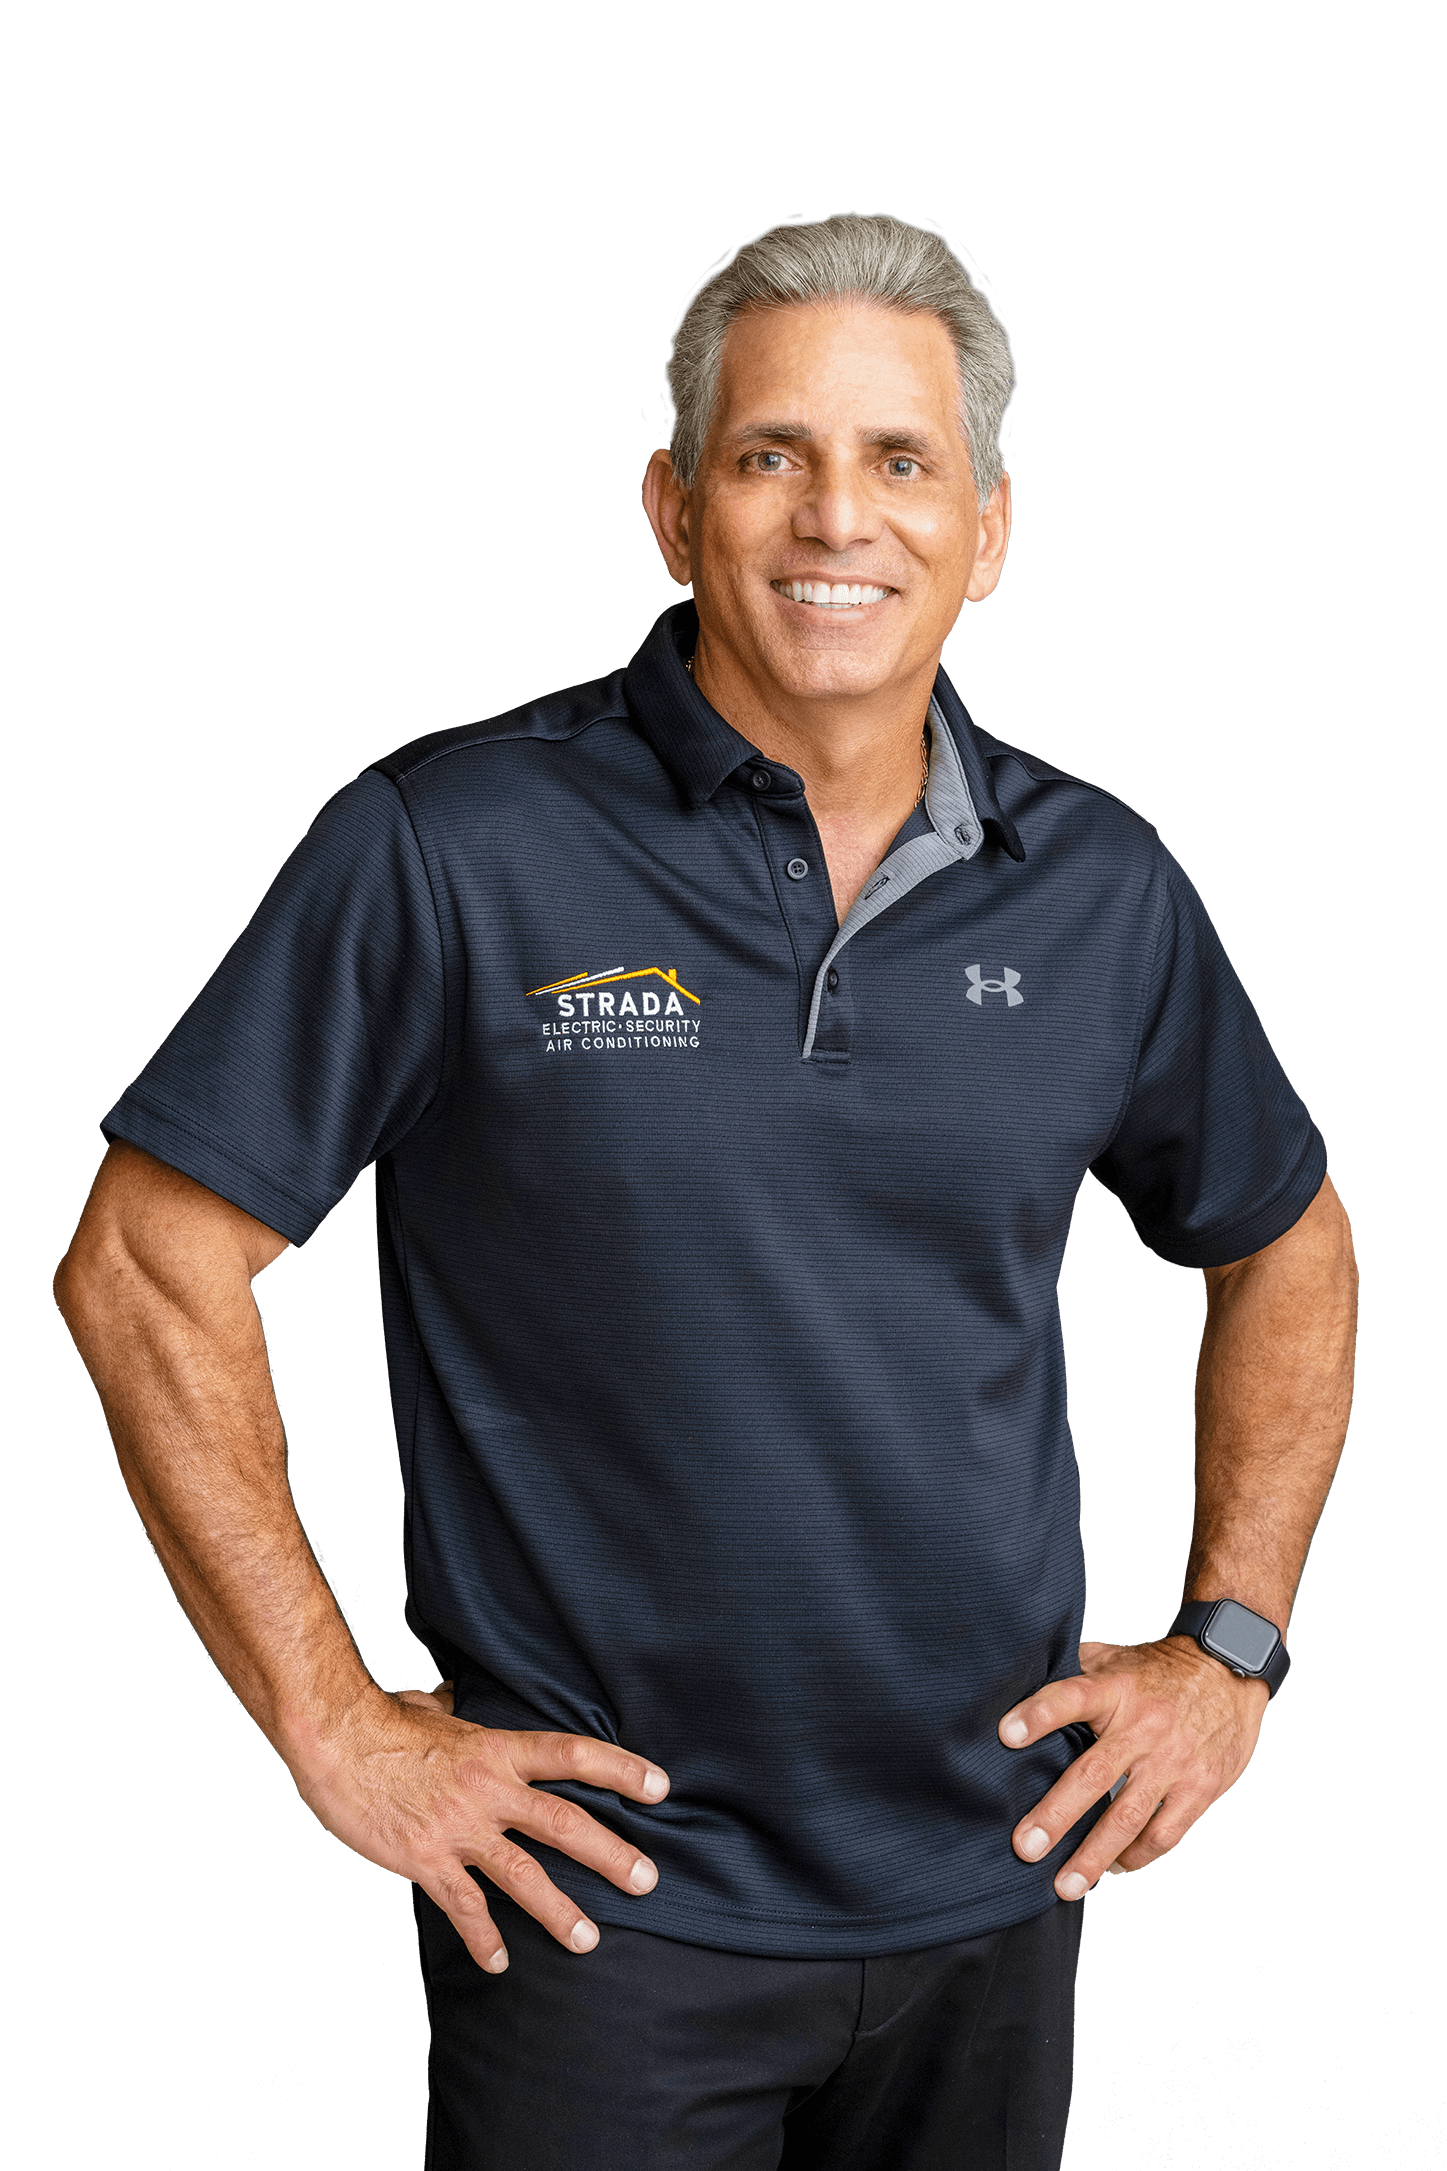 The owner, Joe Strada, is smiling, wearing a Strada Services polo shirt, and has his hands on his hips.